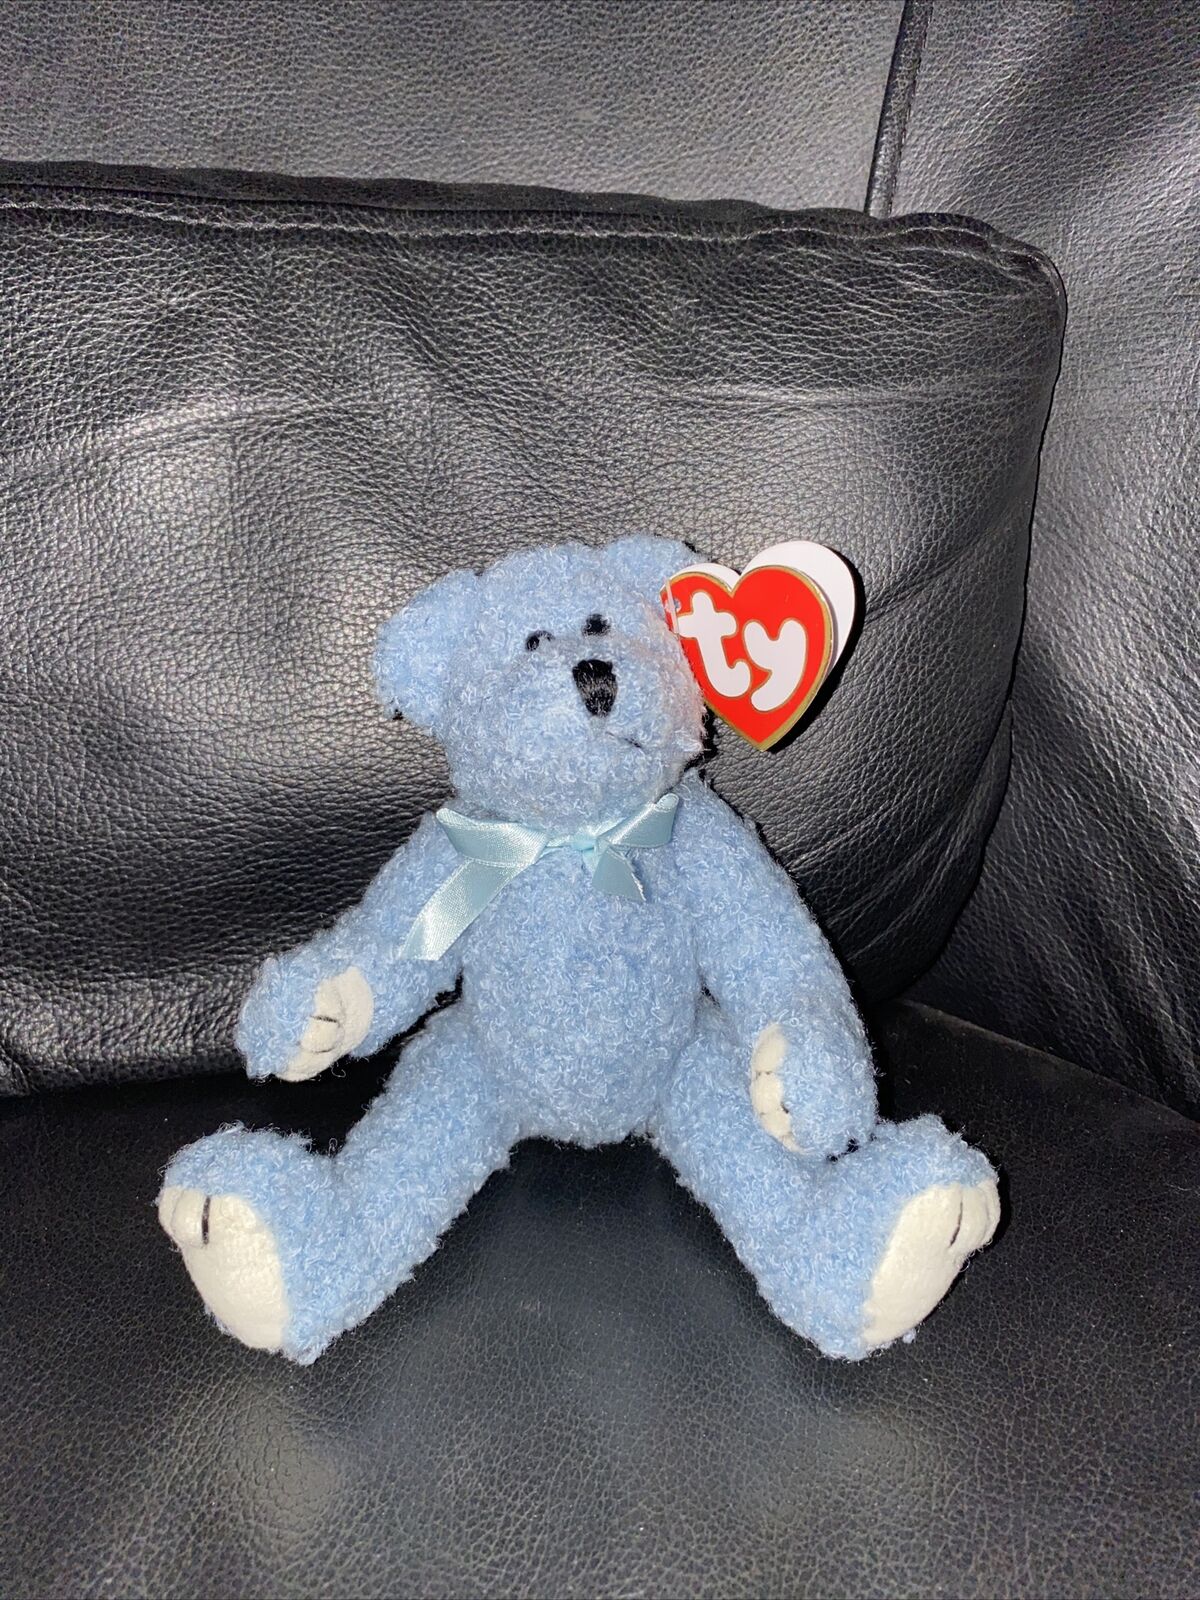 Ty Attic Treasures Plush Jointed Blue Bear "bluebeary" 1993 Short Curly Fur